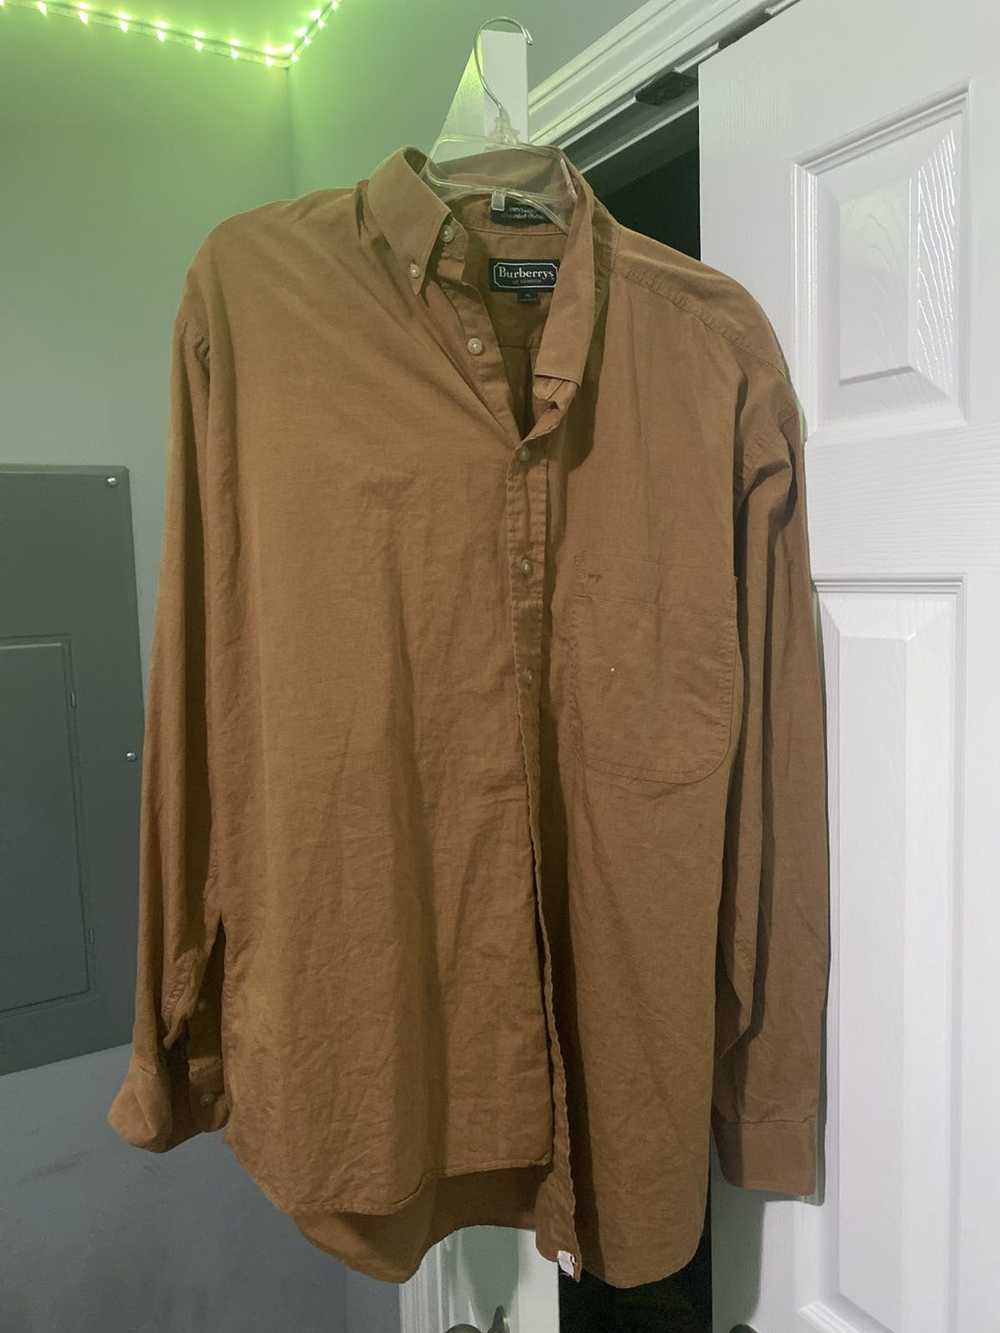 Burberry Burberry brown button up shirt - image 1